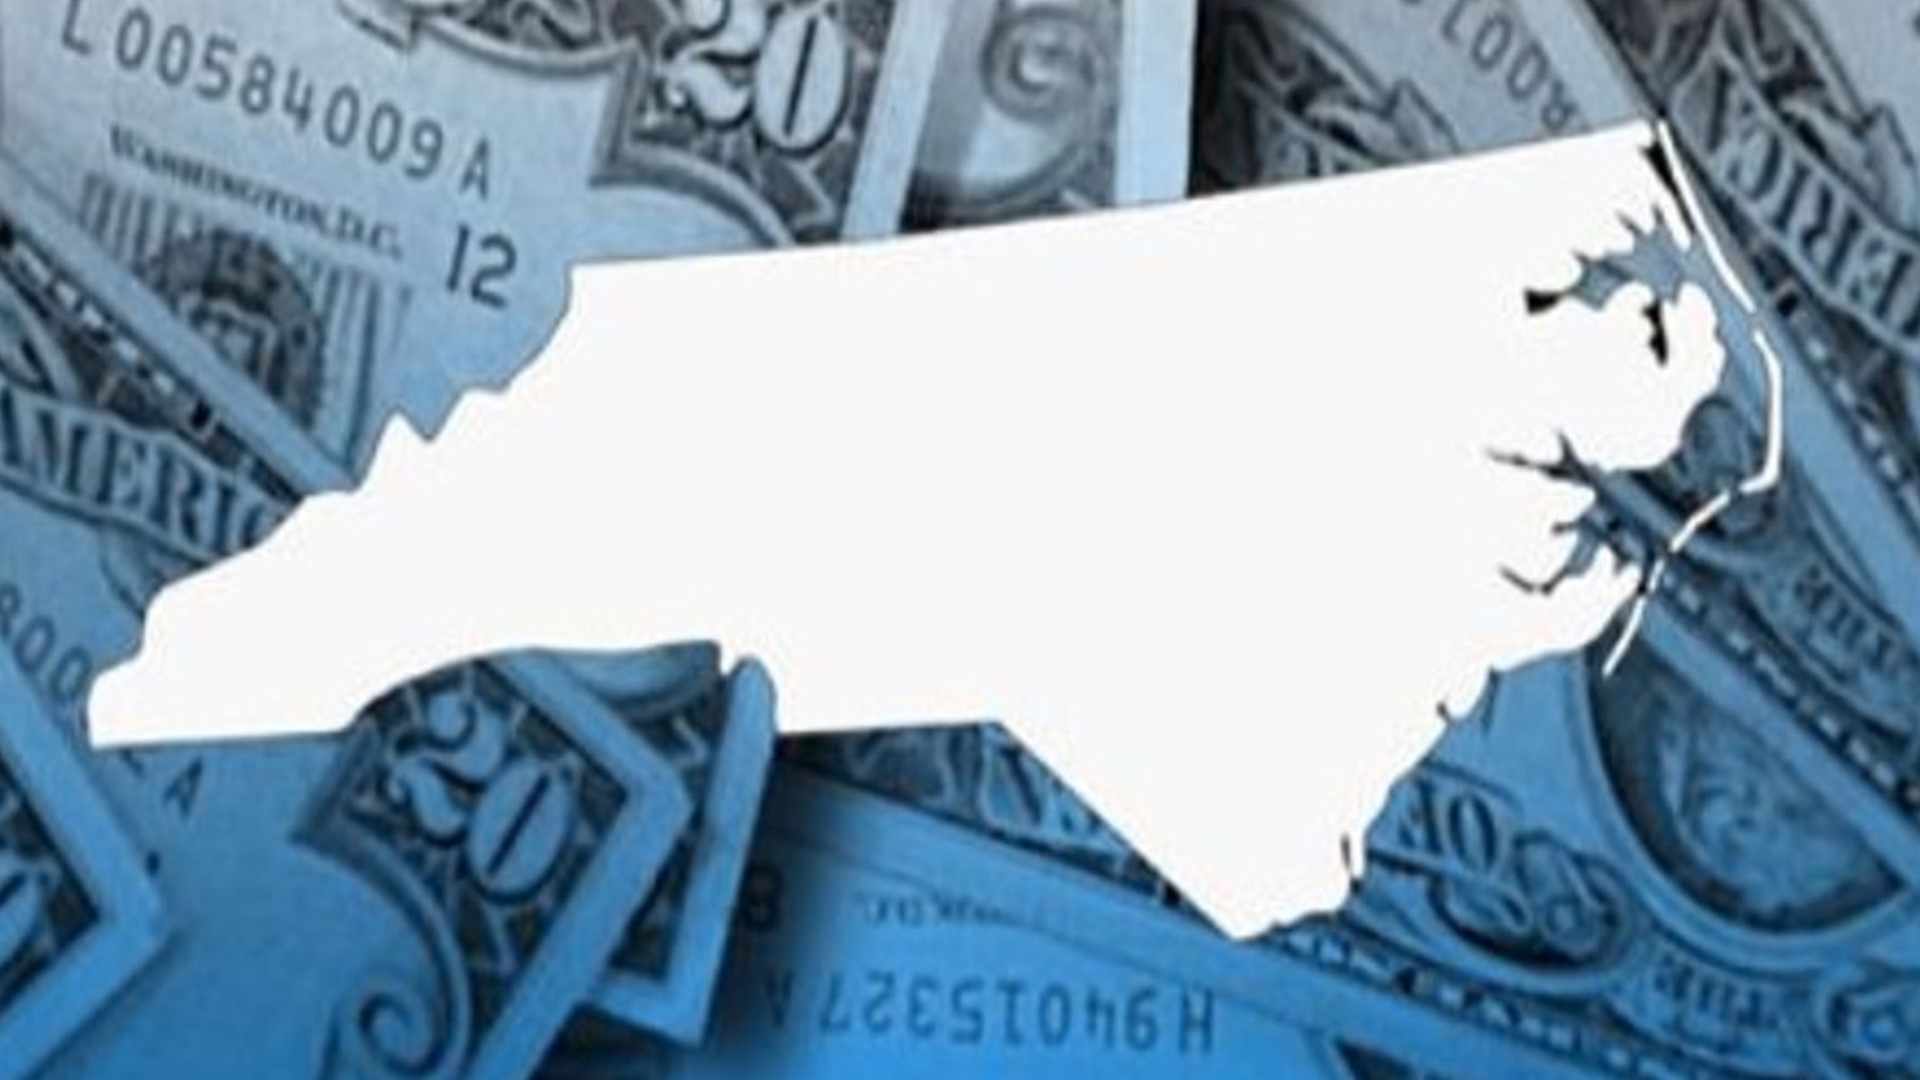 The State Treasurer is sending out checks for unclaimed cash under the NC Cash program. Residents first receive a letter, then their check in the mail.